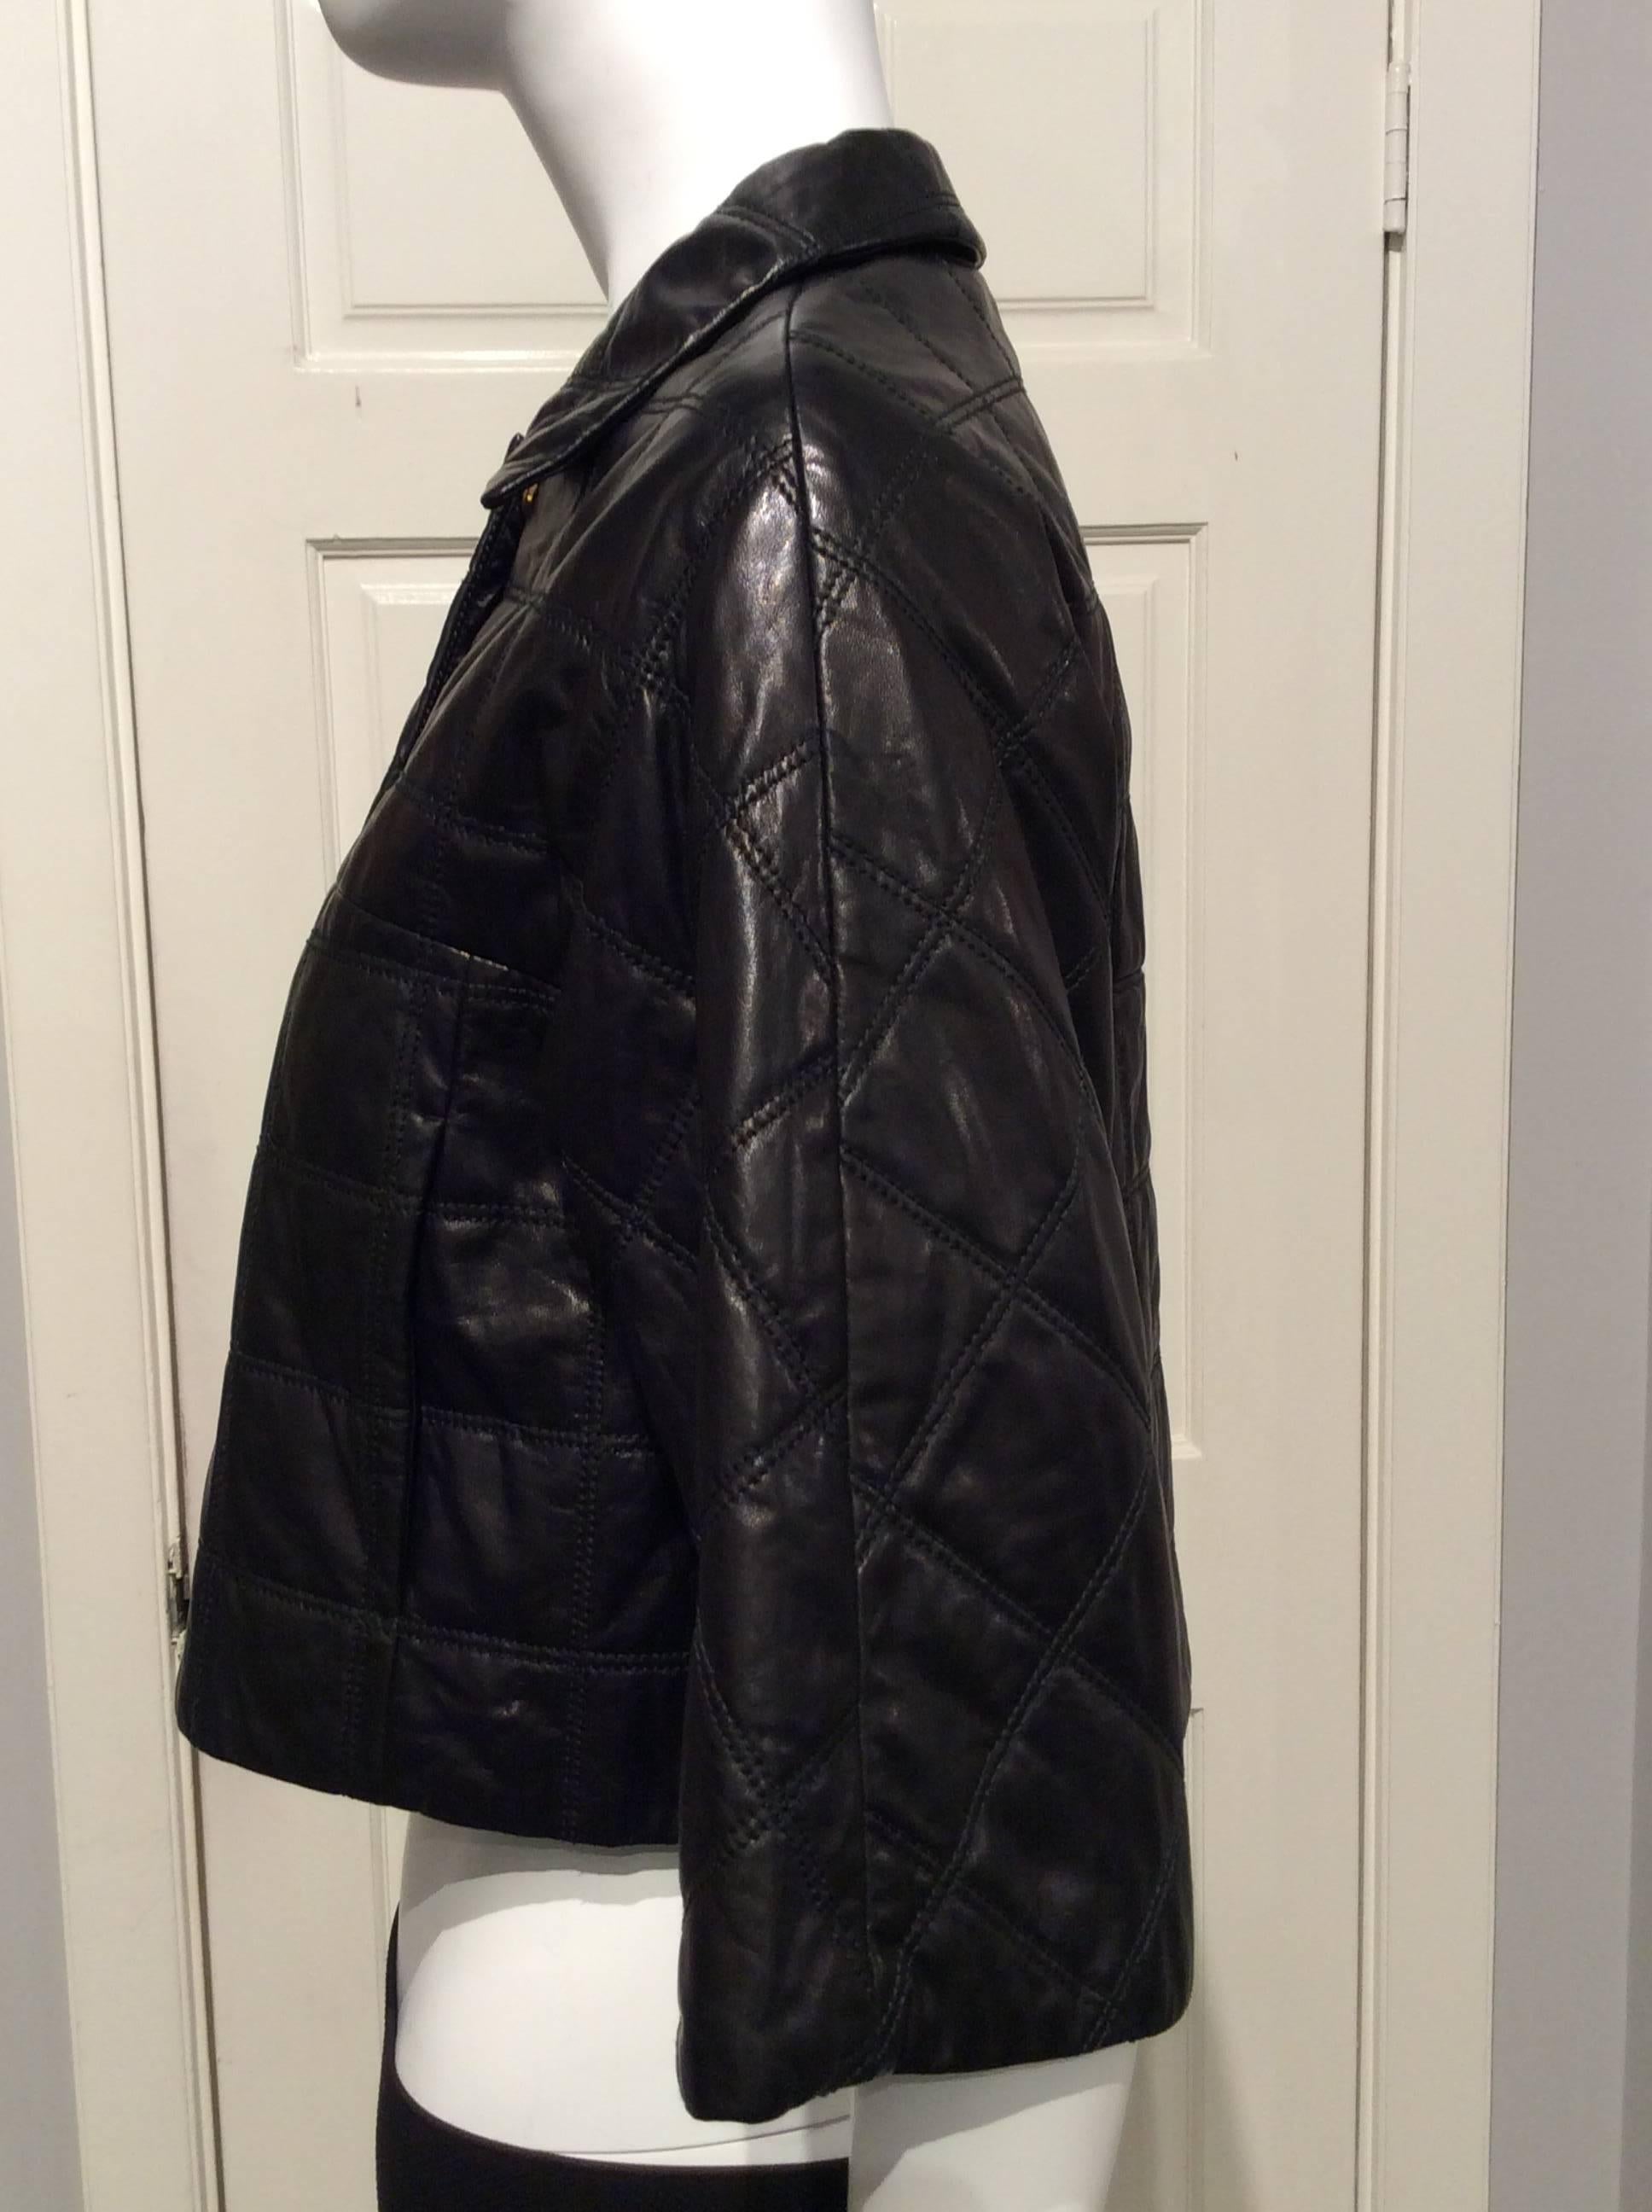 Prada black light weight, waist length leather jacket with a double stich quilted pattern. It has elbow length sleeves, two 5.5in  slit pockets, it closes with five gold toned snap buttons and an additional gold toned zipper. 